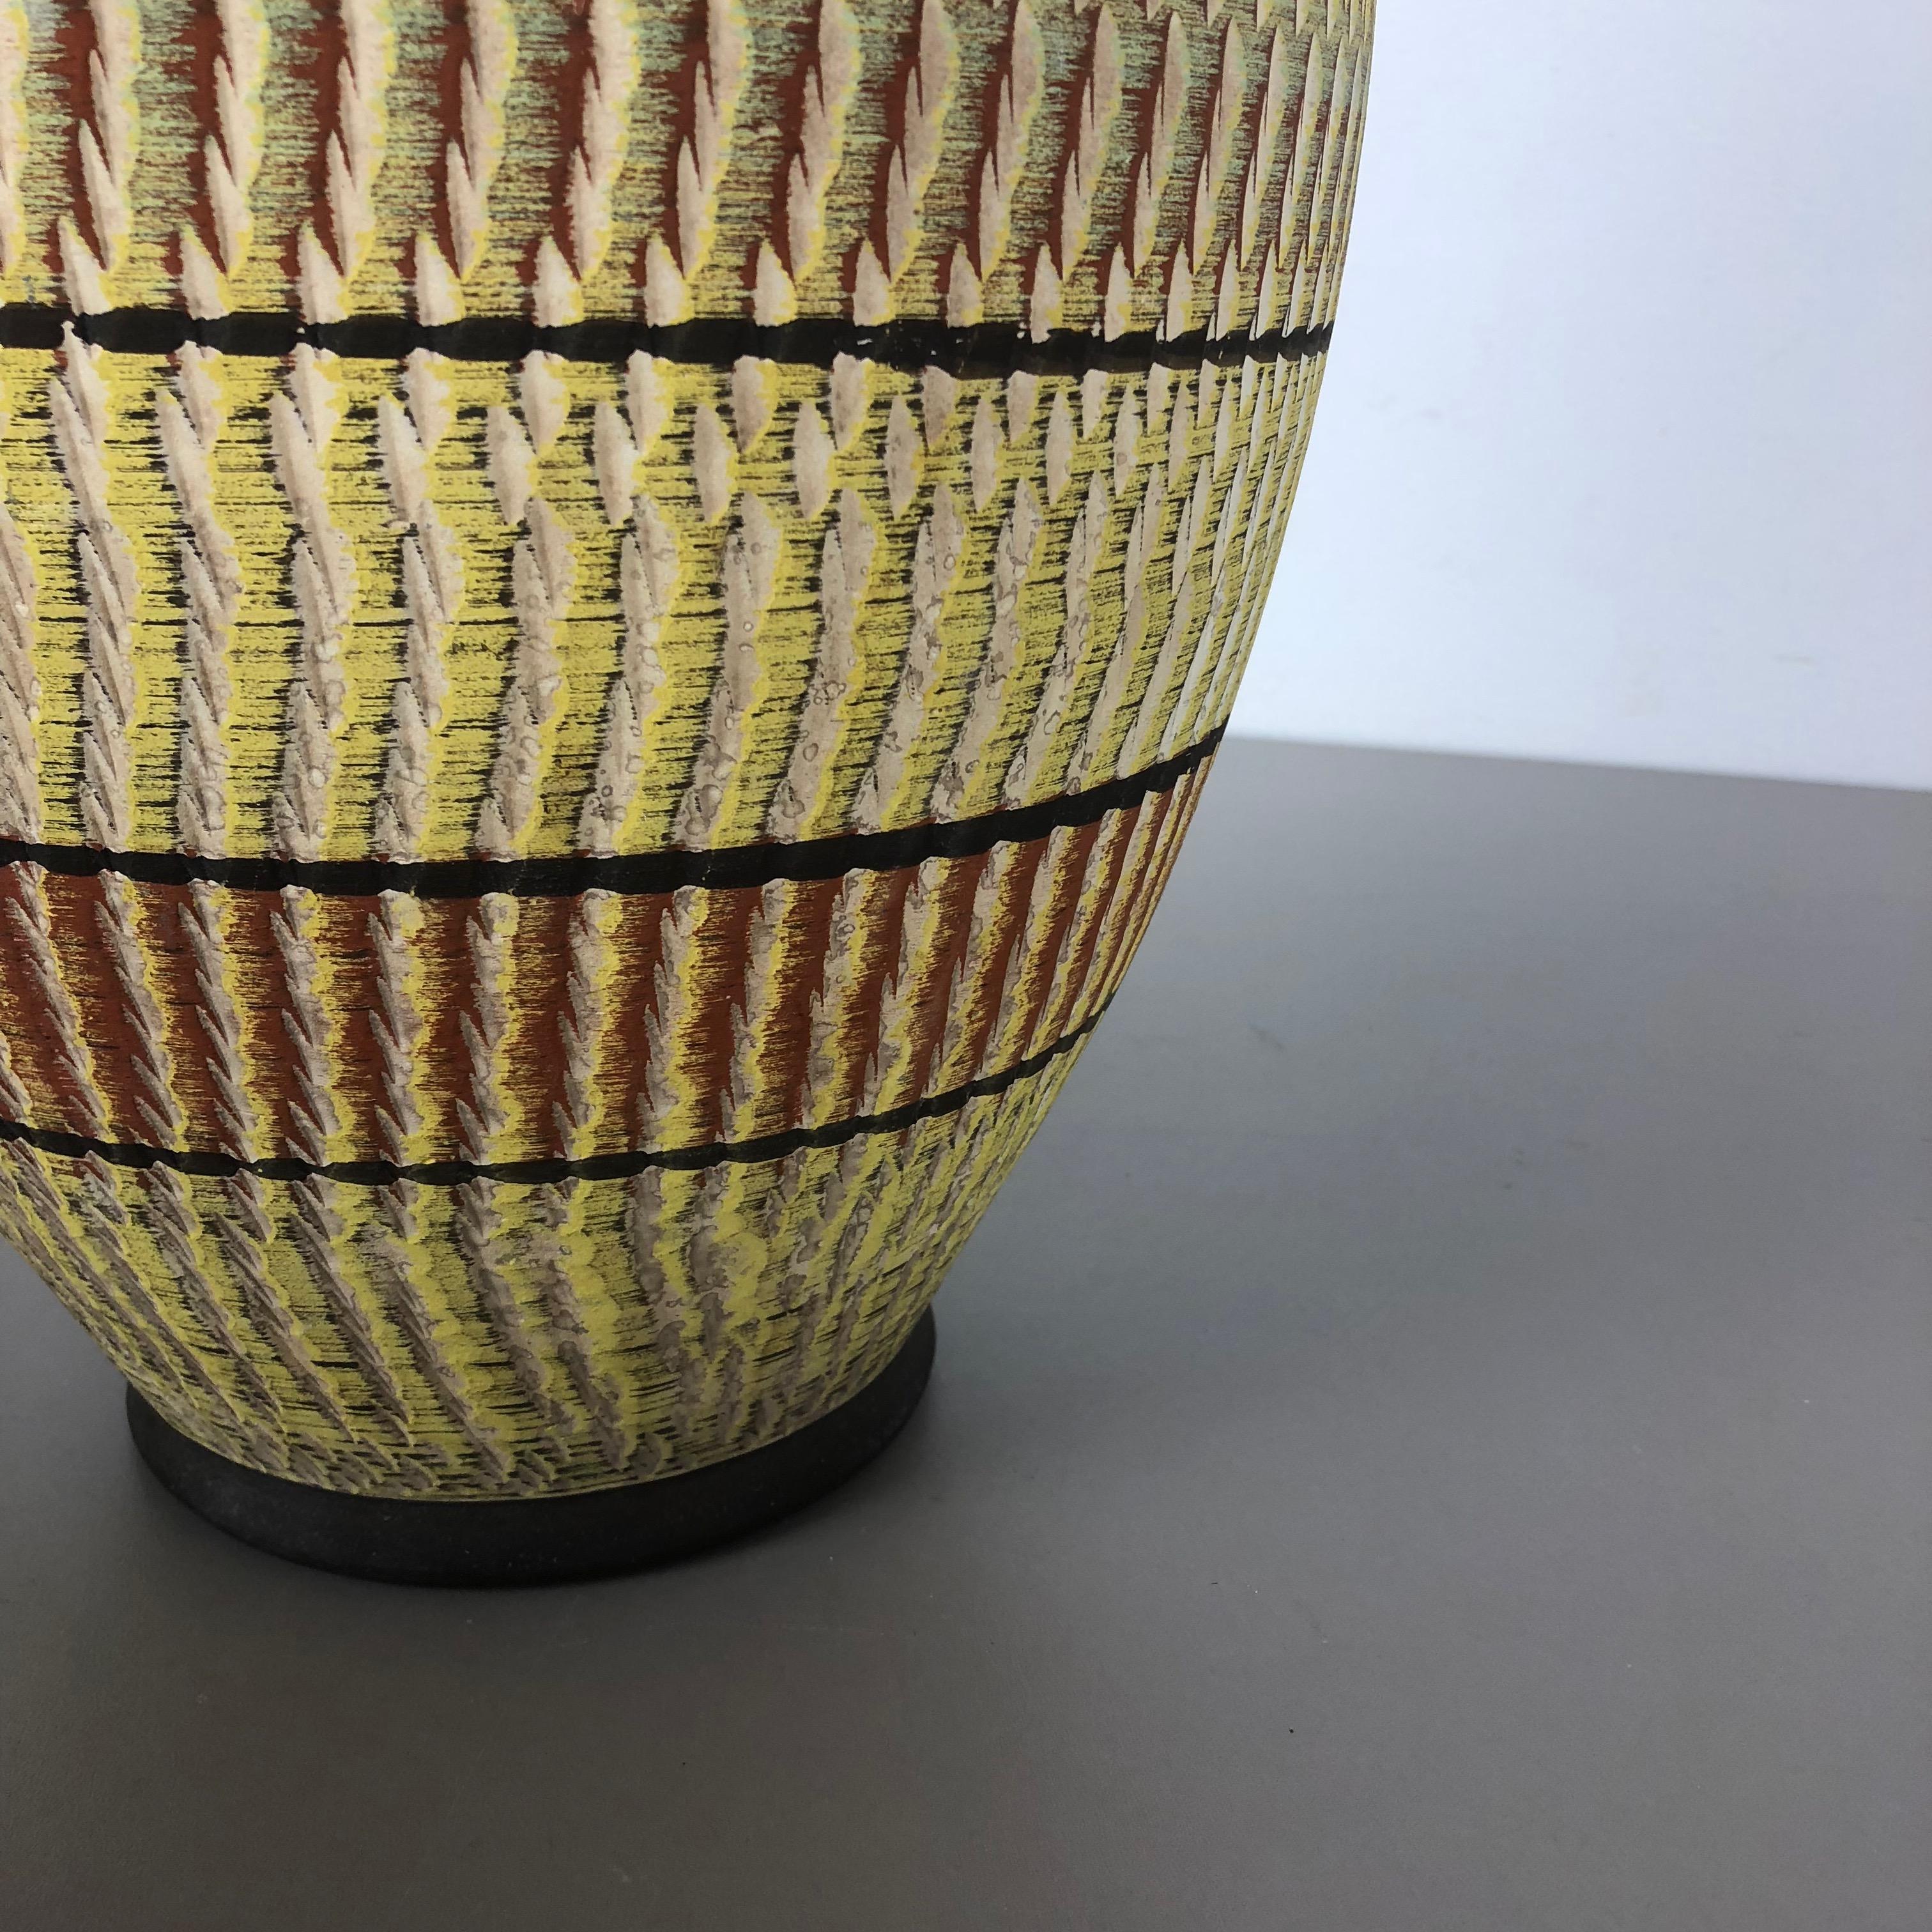 Large abstract Ceramic Pottery Floor Vase by Zöller and Born, Germany, 1950s For Sale 4